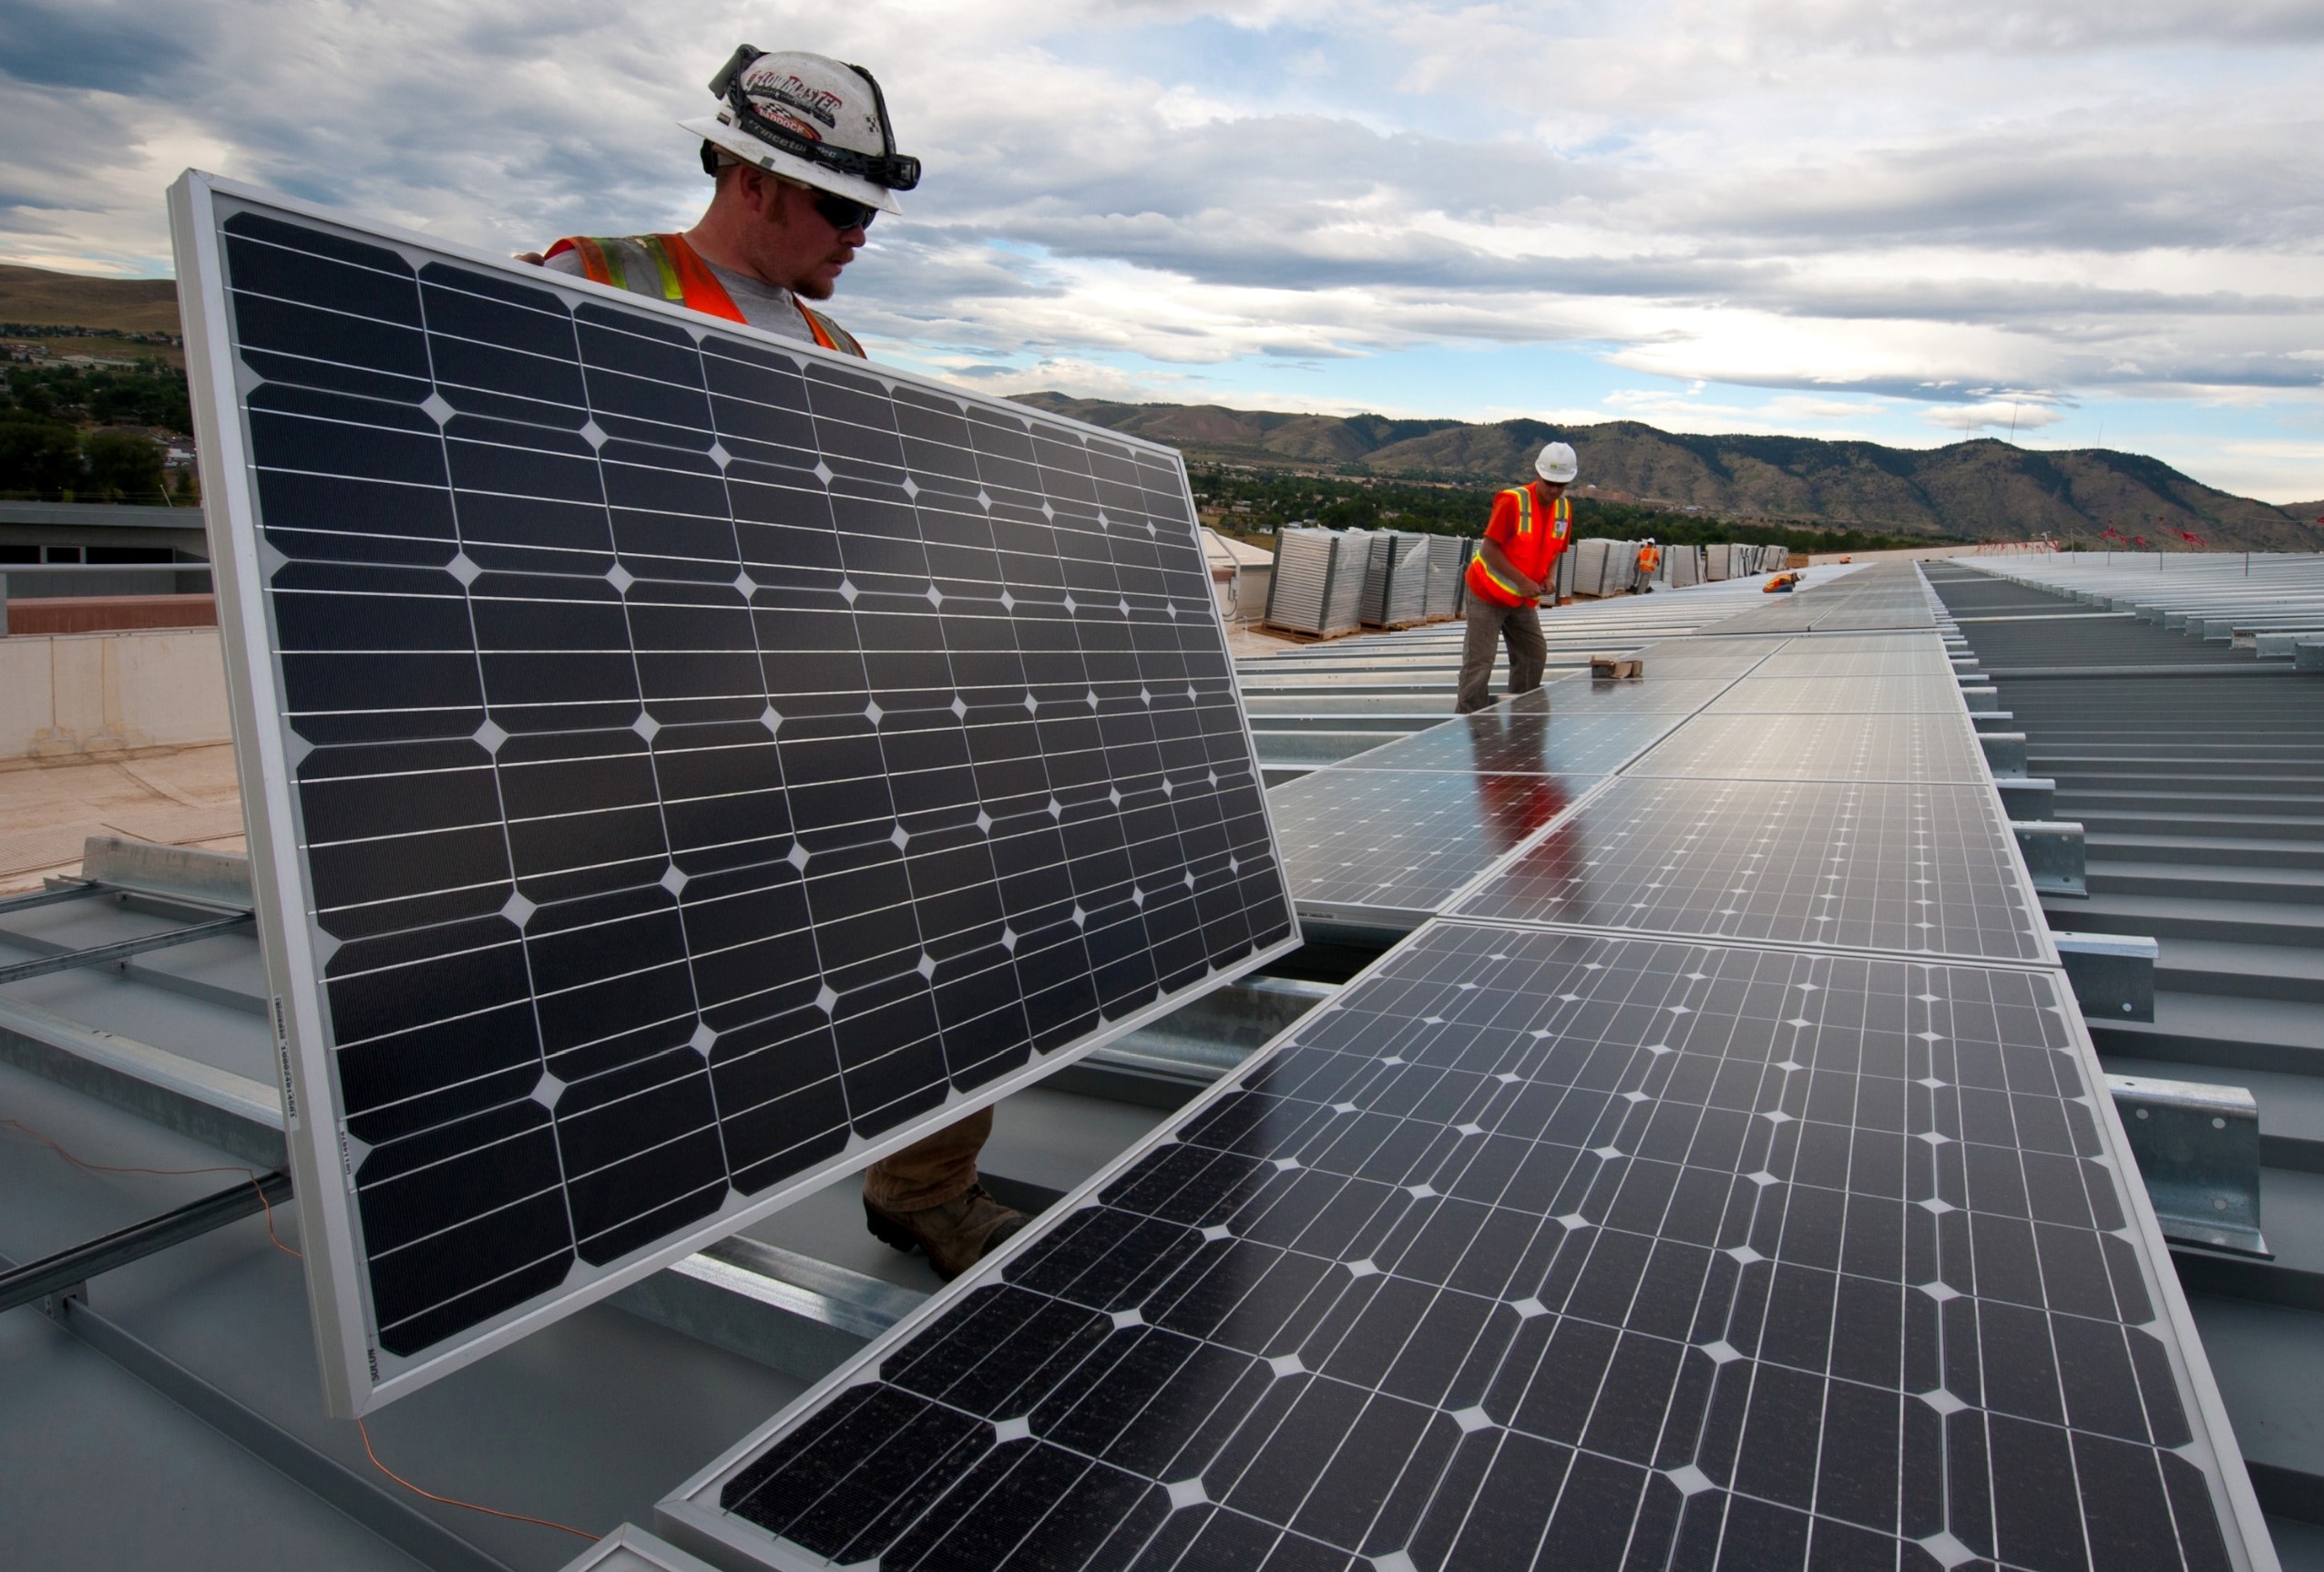 A team installing solar panels on a building rooftop